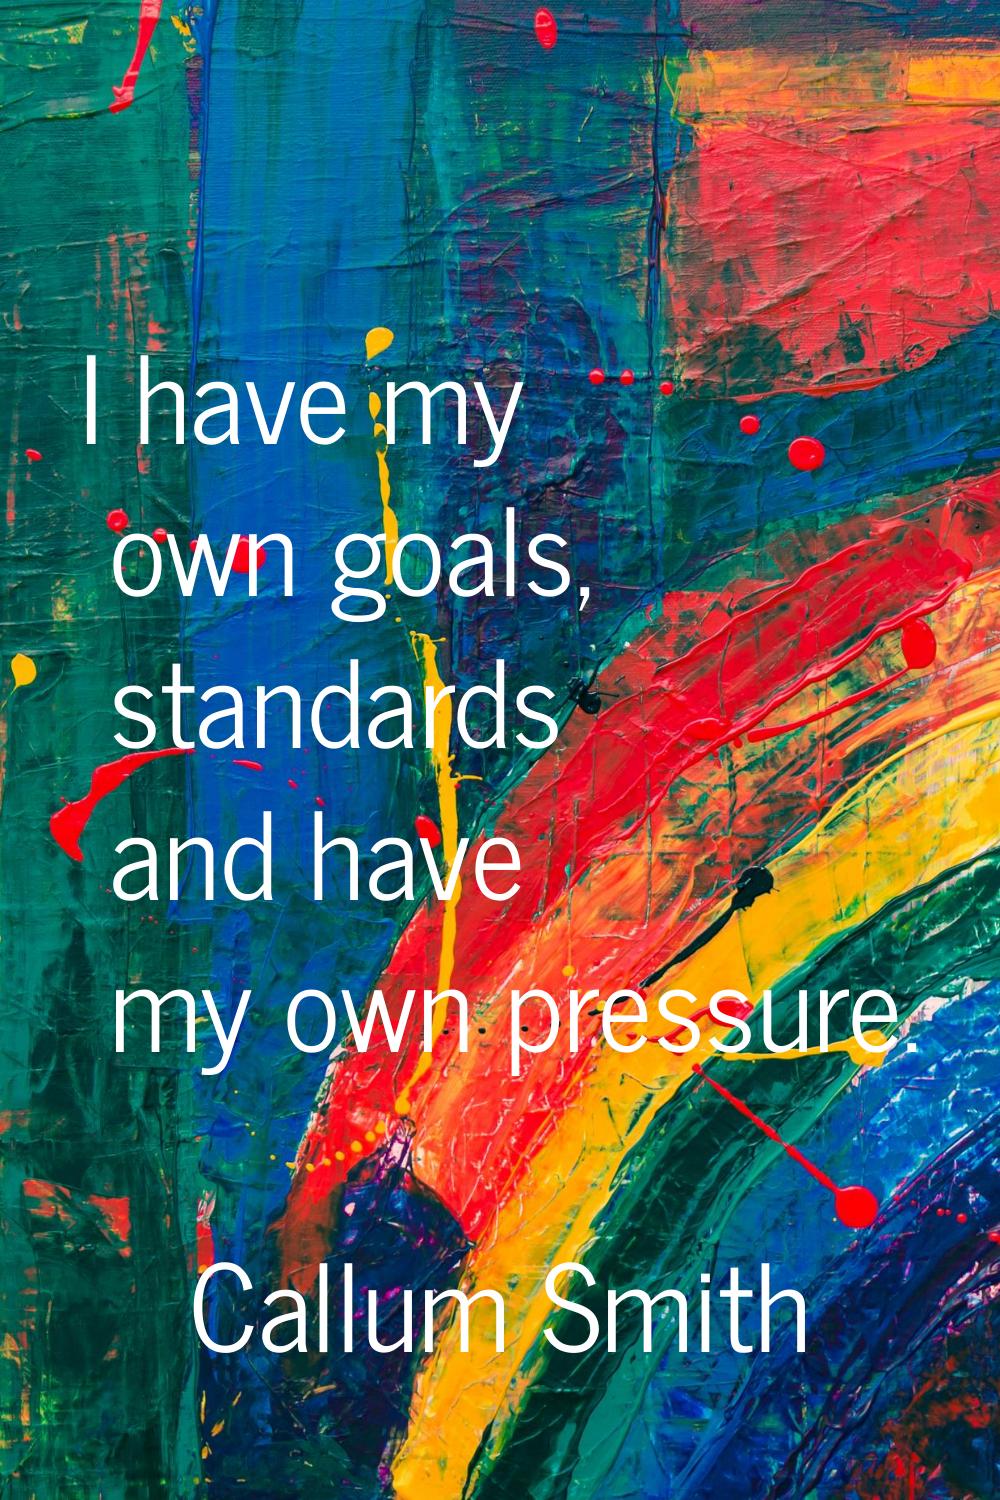 I have my own goals, standards and have my own pressure.